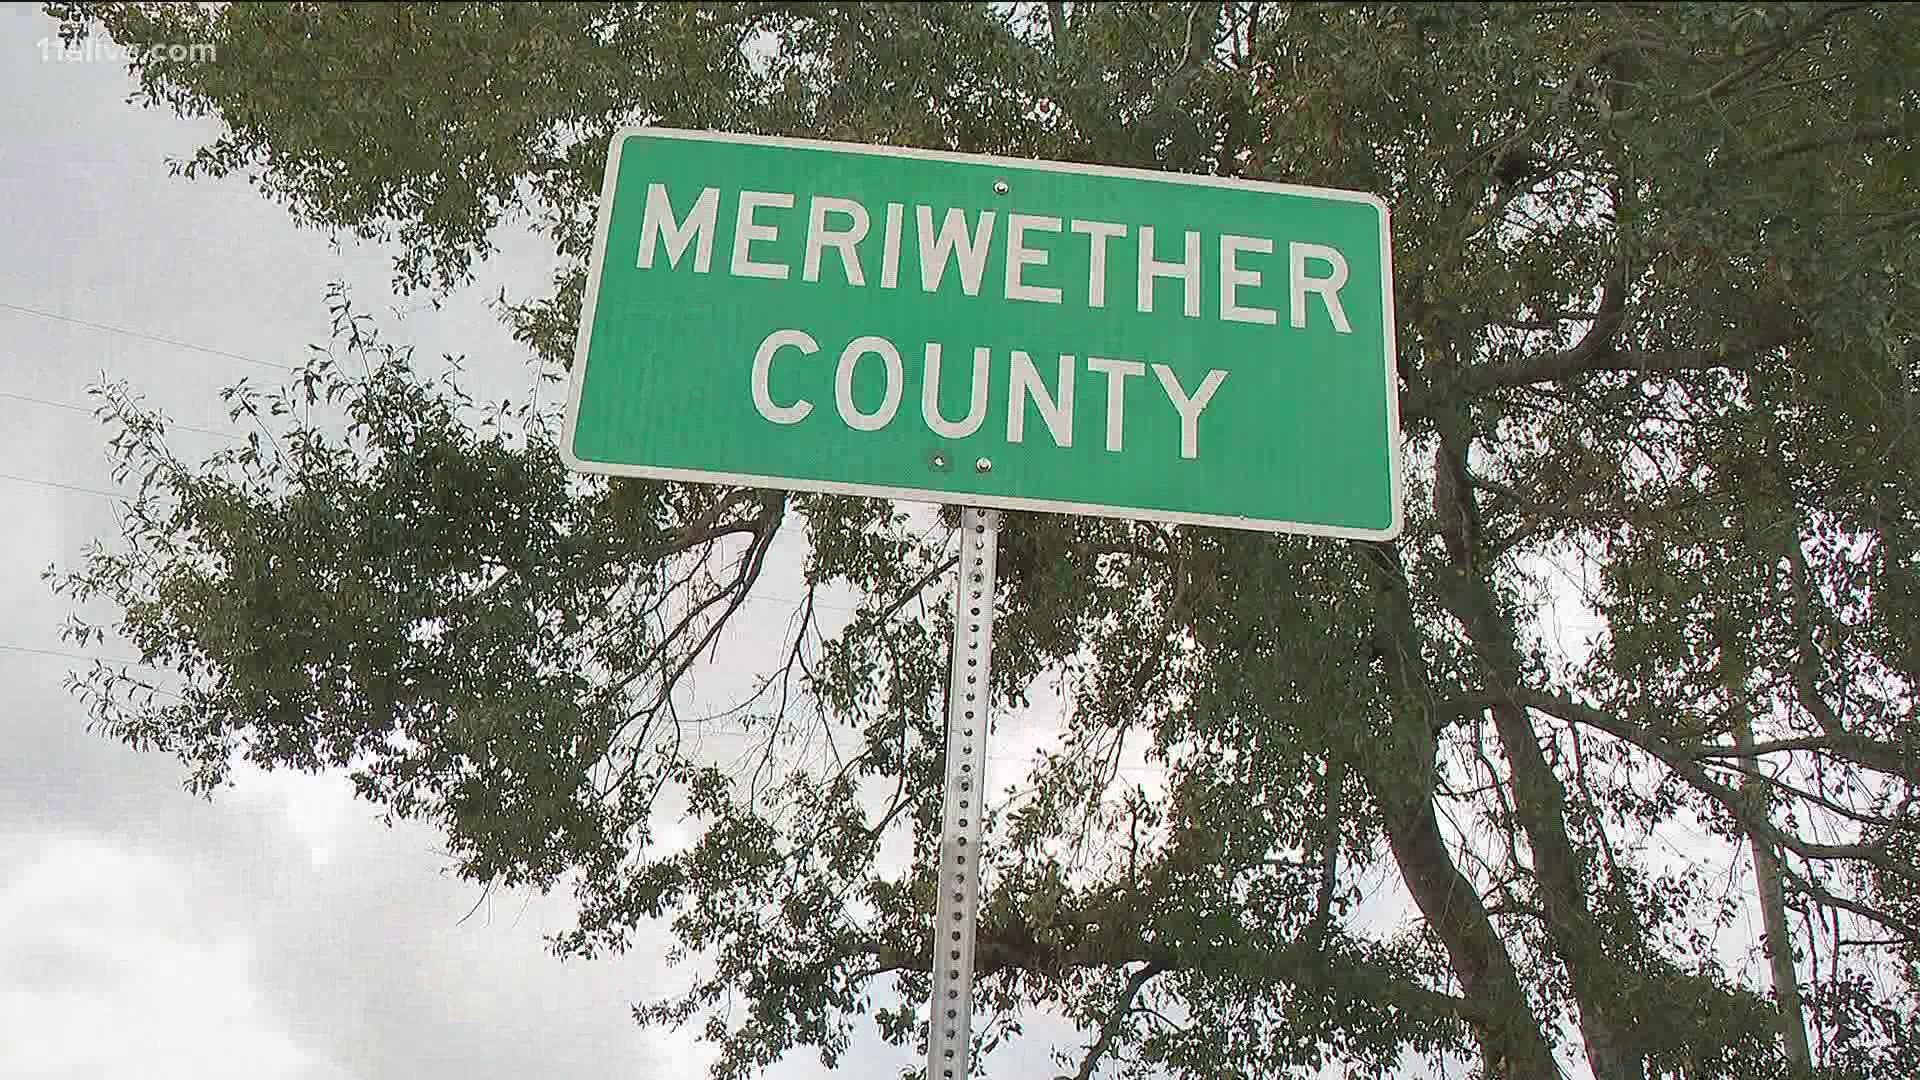 Joe Biden's visit to Meriwether County carries a lot of symbolism. But local politicians suggest the county itself could also swing in the election.